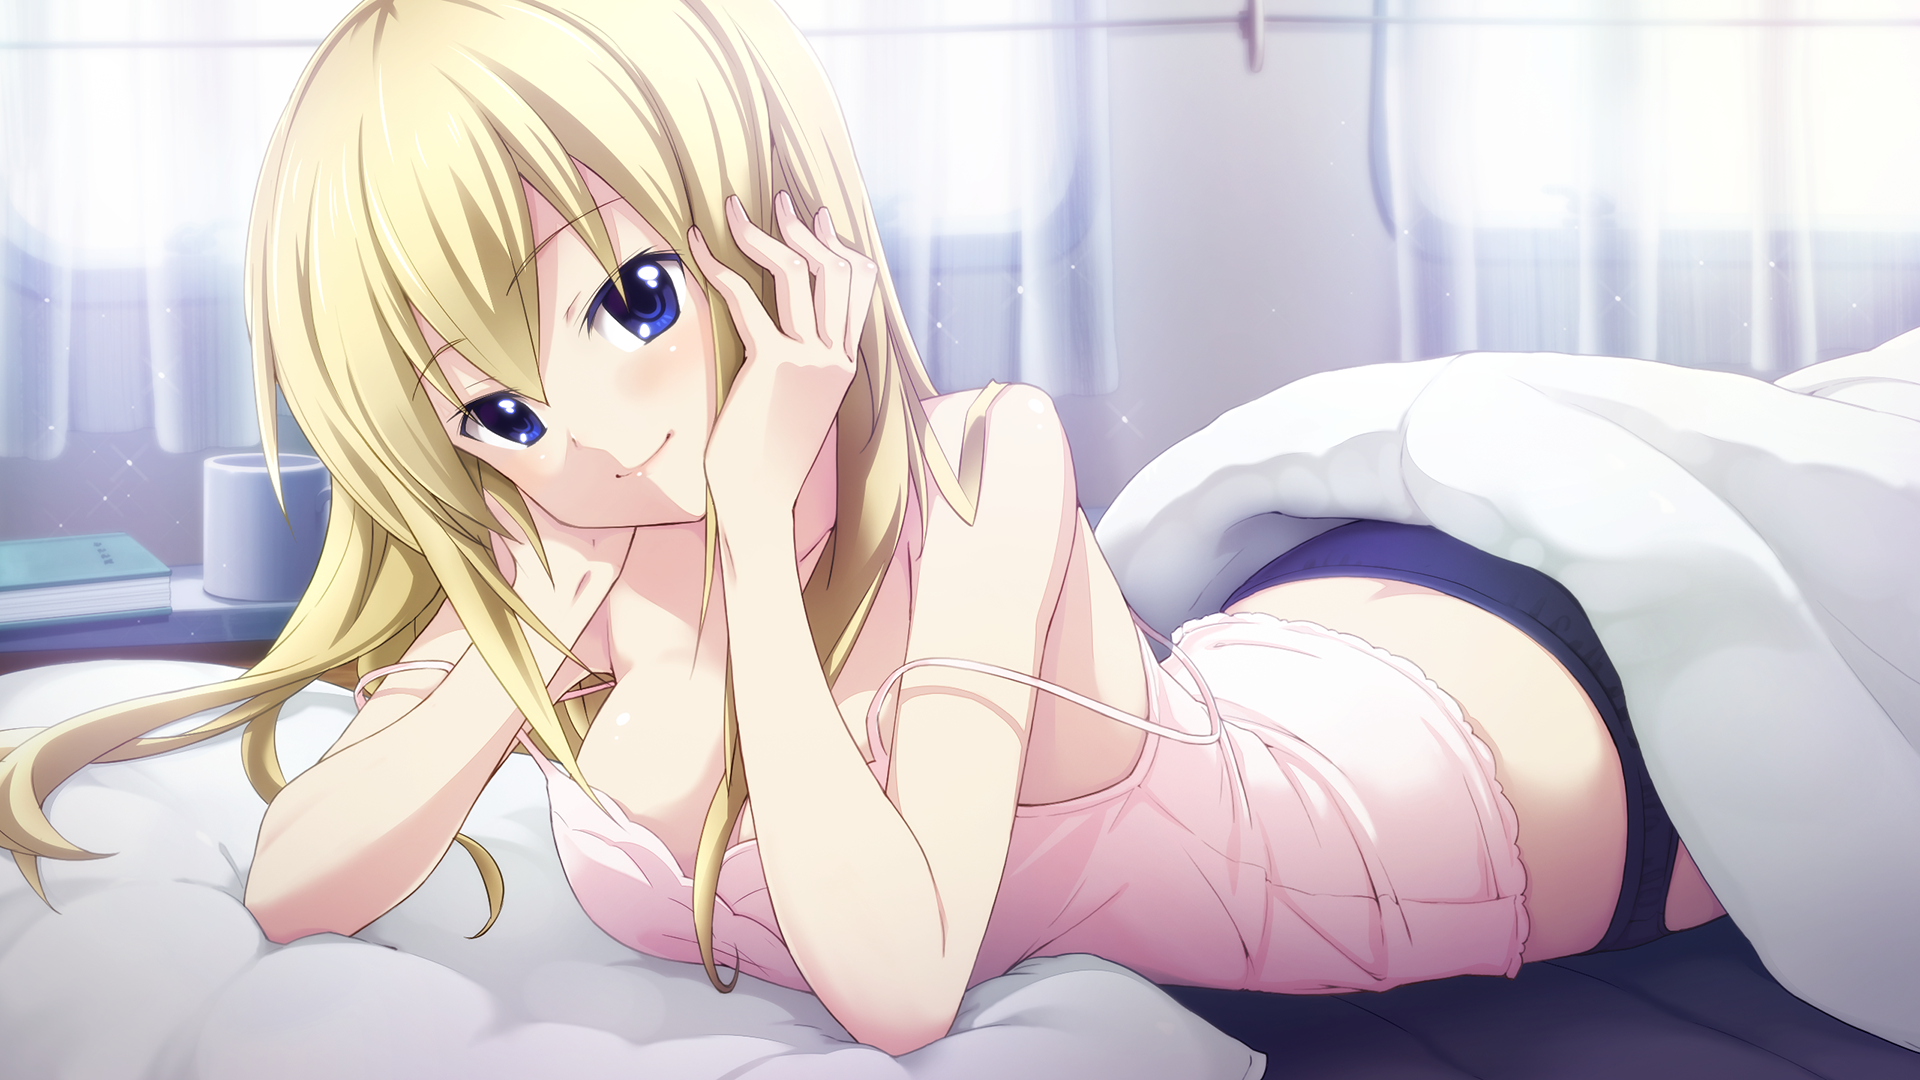 Anime 1920x1080 anime girls blonde blue eyes smiling camisole panties lying on front in bed artwork Sasaki Mutsumi bright Hinae Arimura Chaos;Child Love Chu Chu!! closed mouth long hair women indoors lying down